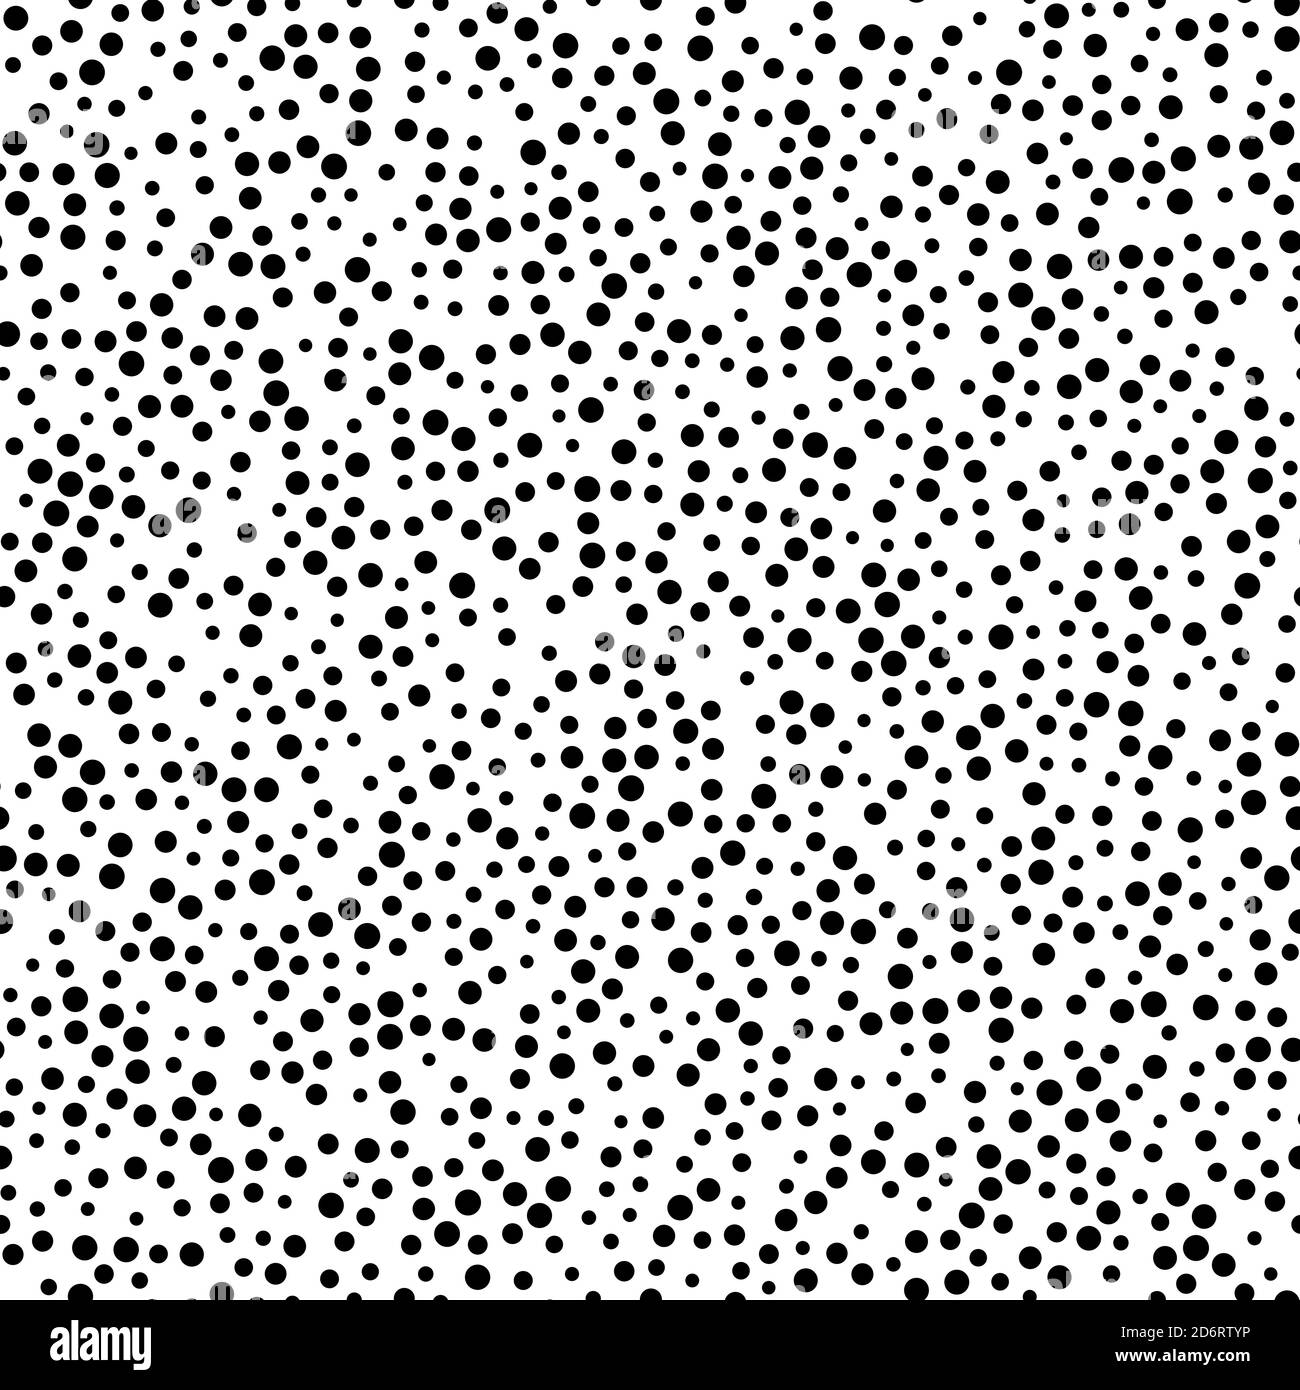 Random scattered dots, abstract black and white background. Seamless ...